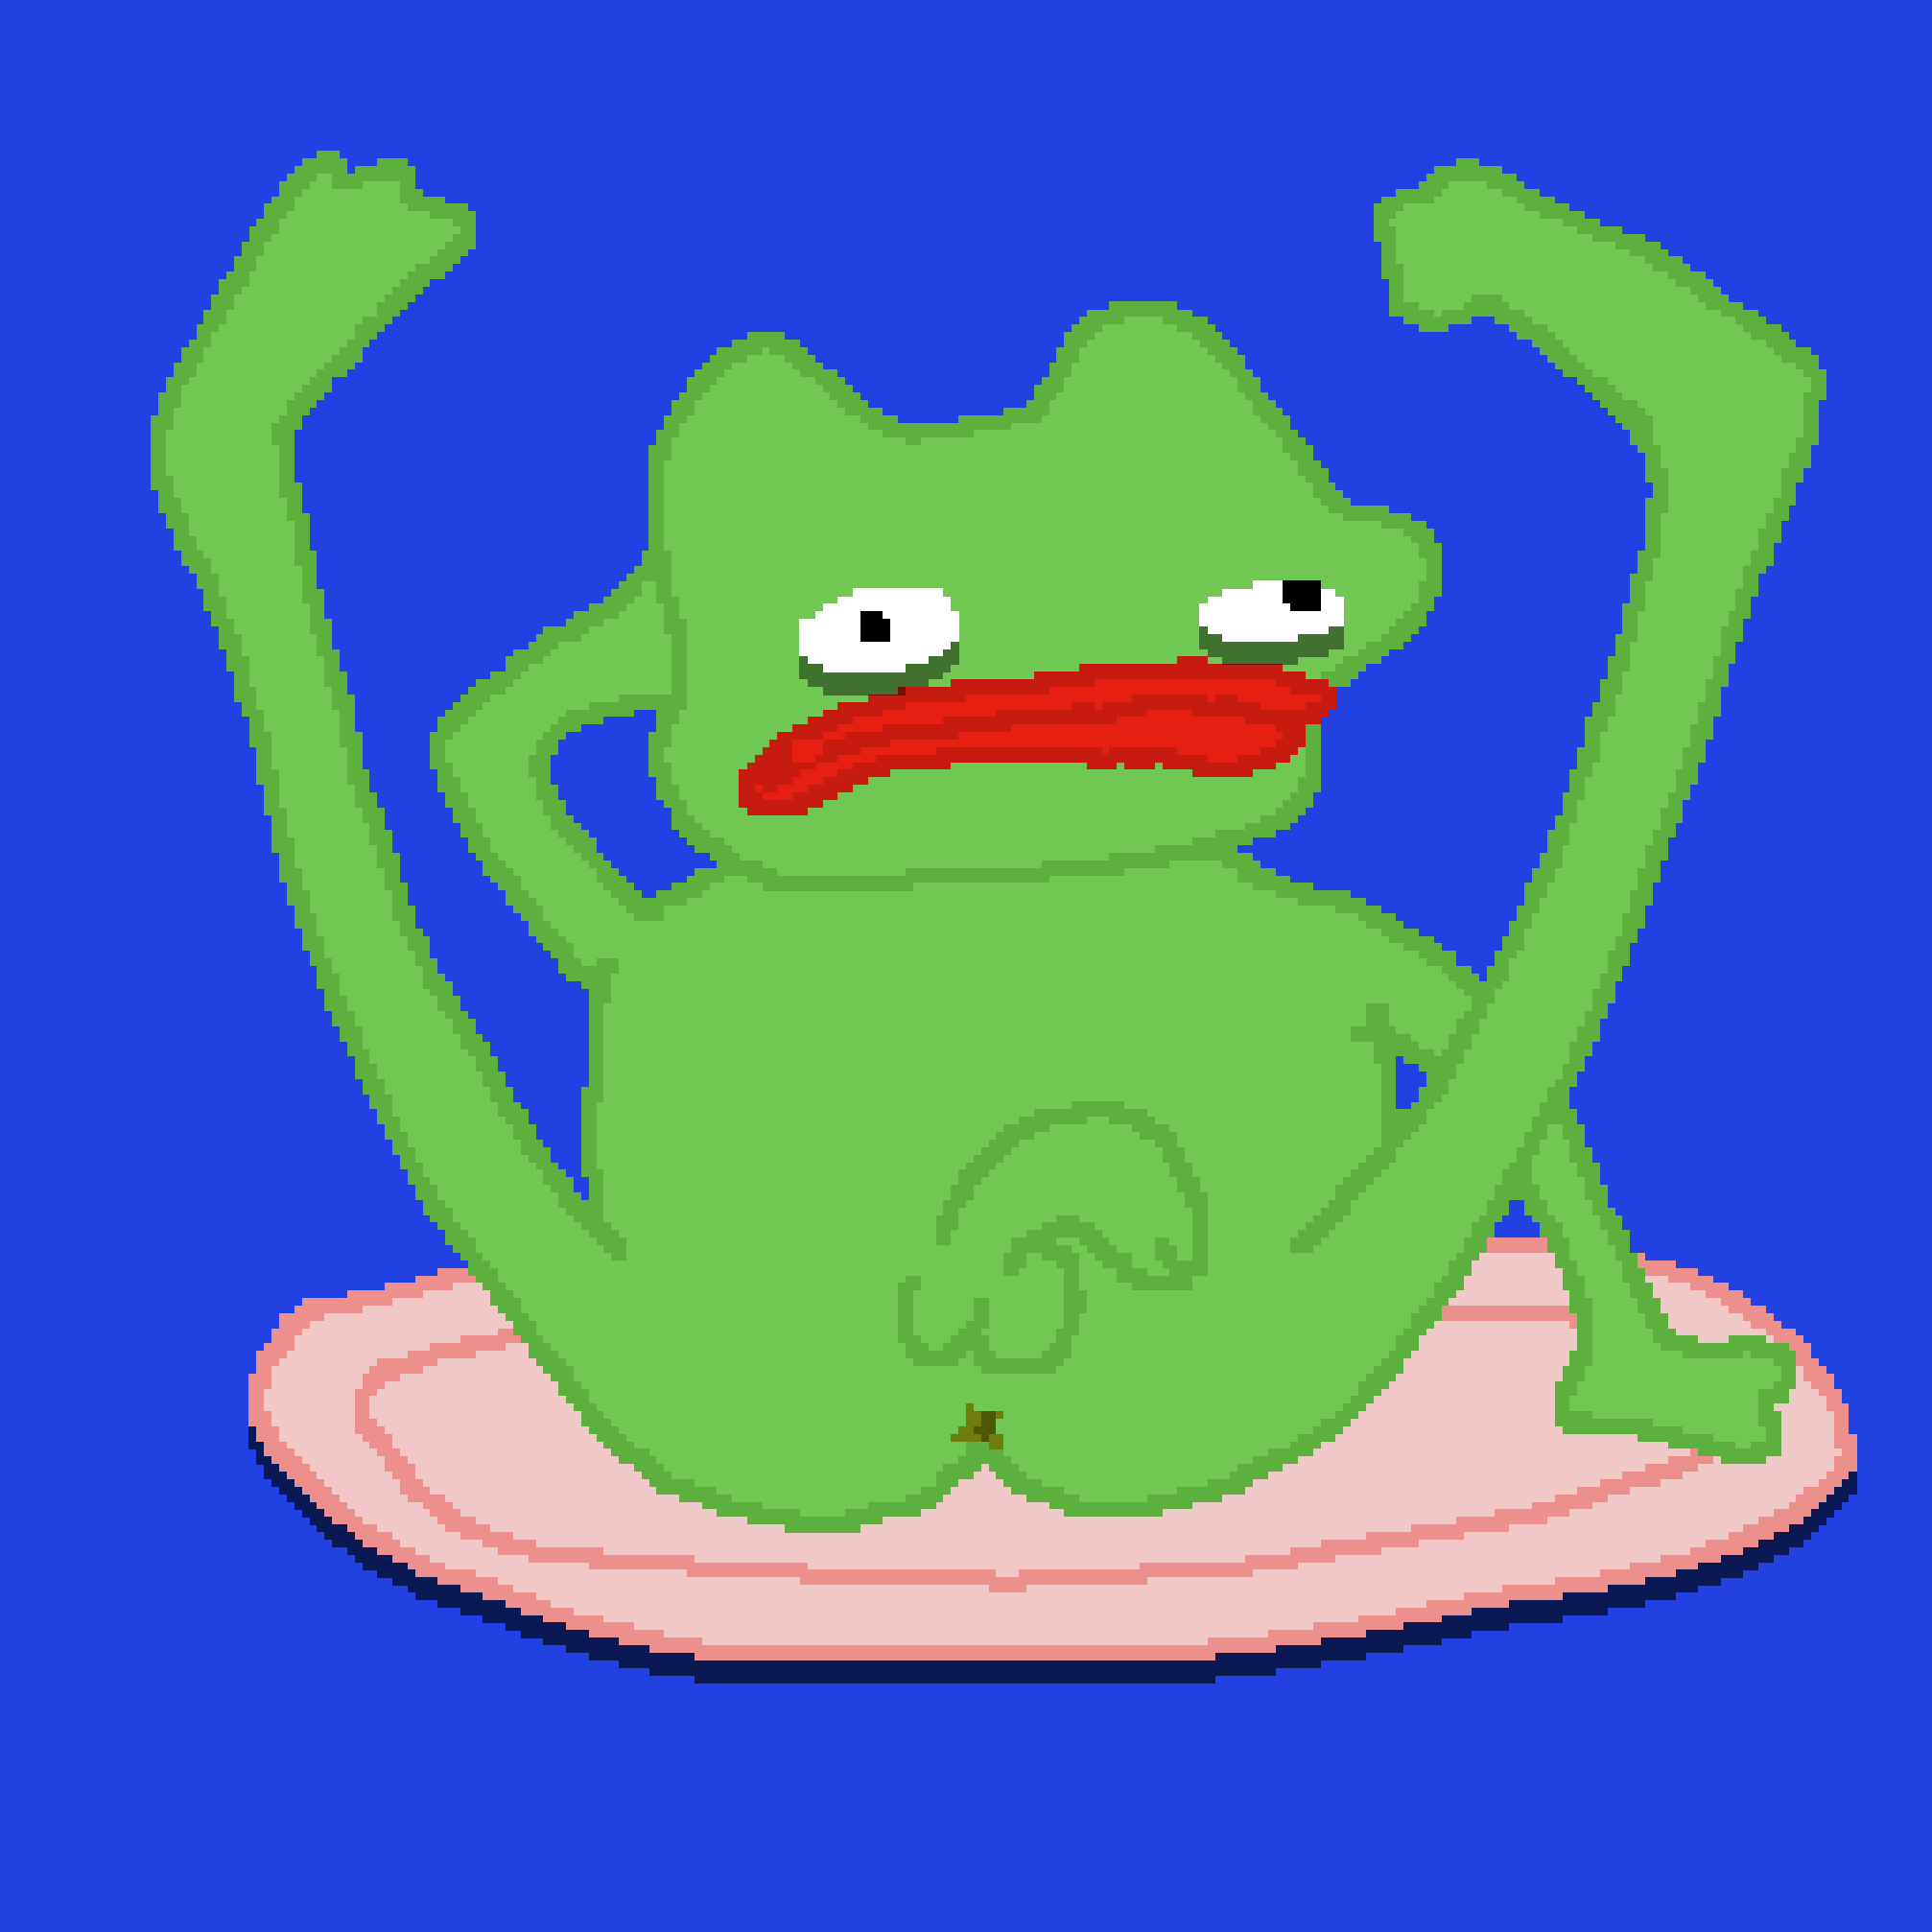 sexy frog